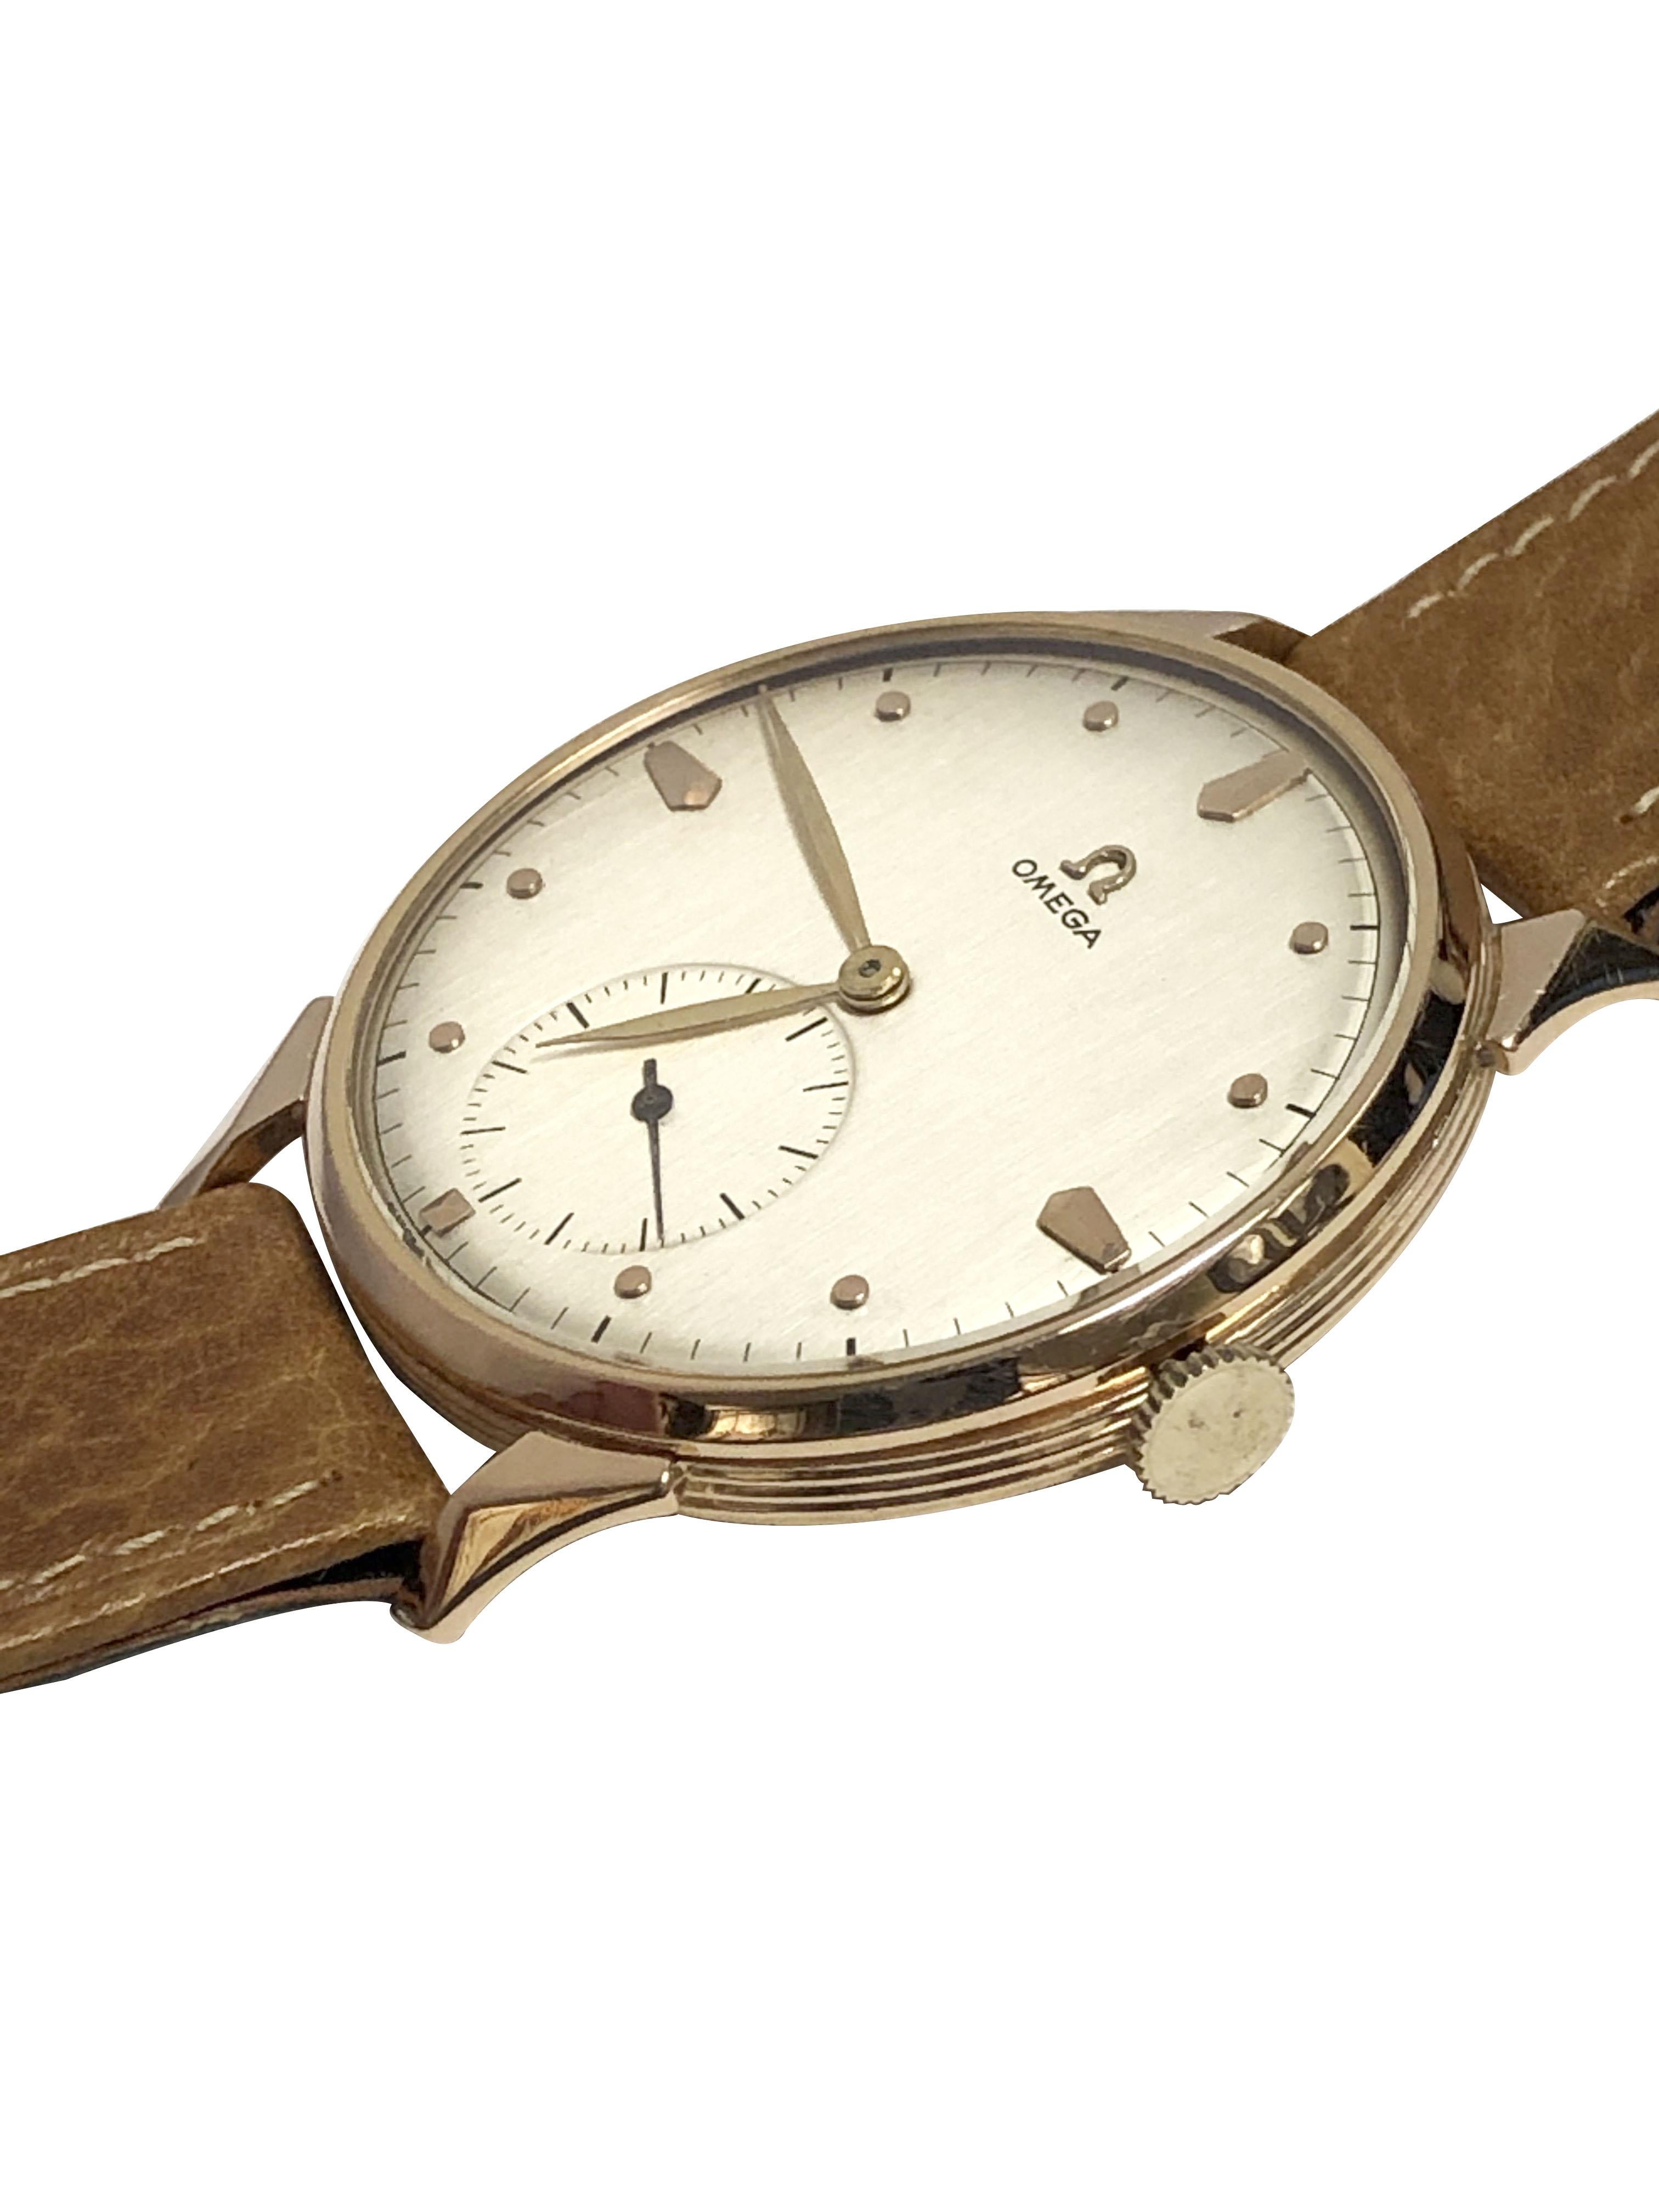 Circa late 1940s Omega Wrist Watch, 37 M.M. 3 Piece 18k Rose Gold contract case for the South American market. Caliber 265, 15 Jewel, Mechanical, Manual wind movement. Silver Satin dial with raised Rose Gold markers, the dial was correctly and